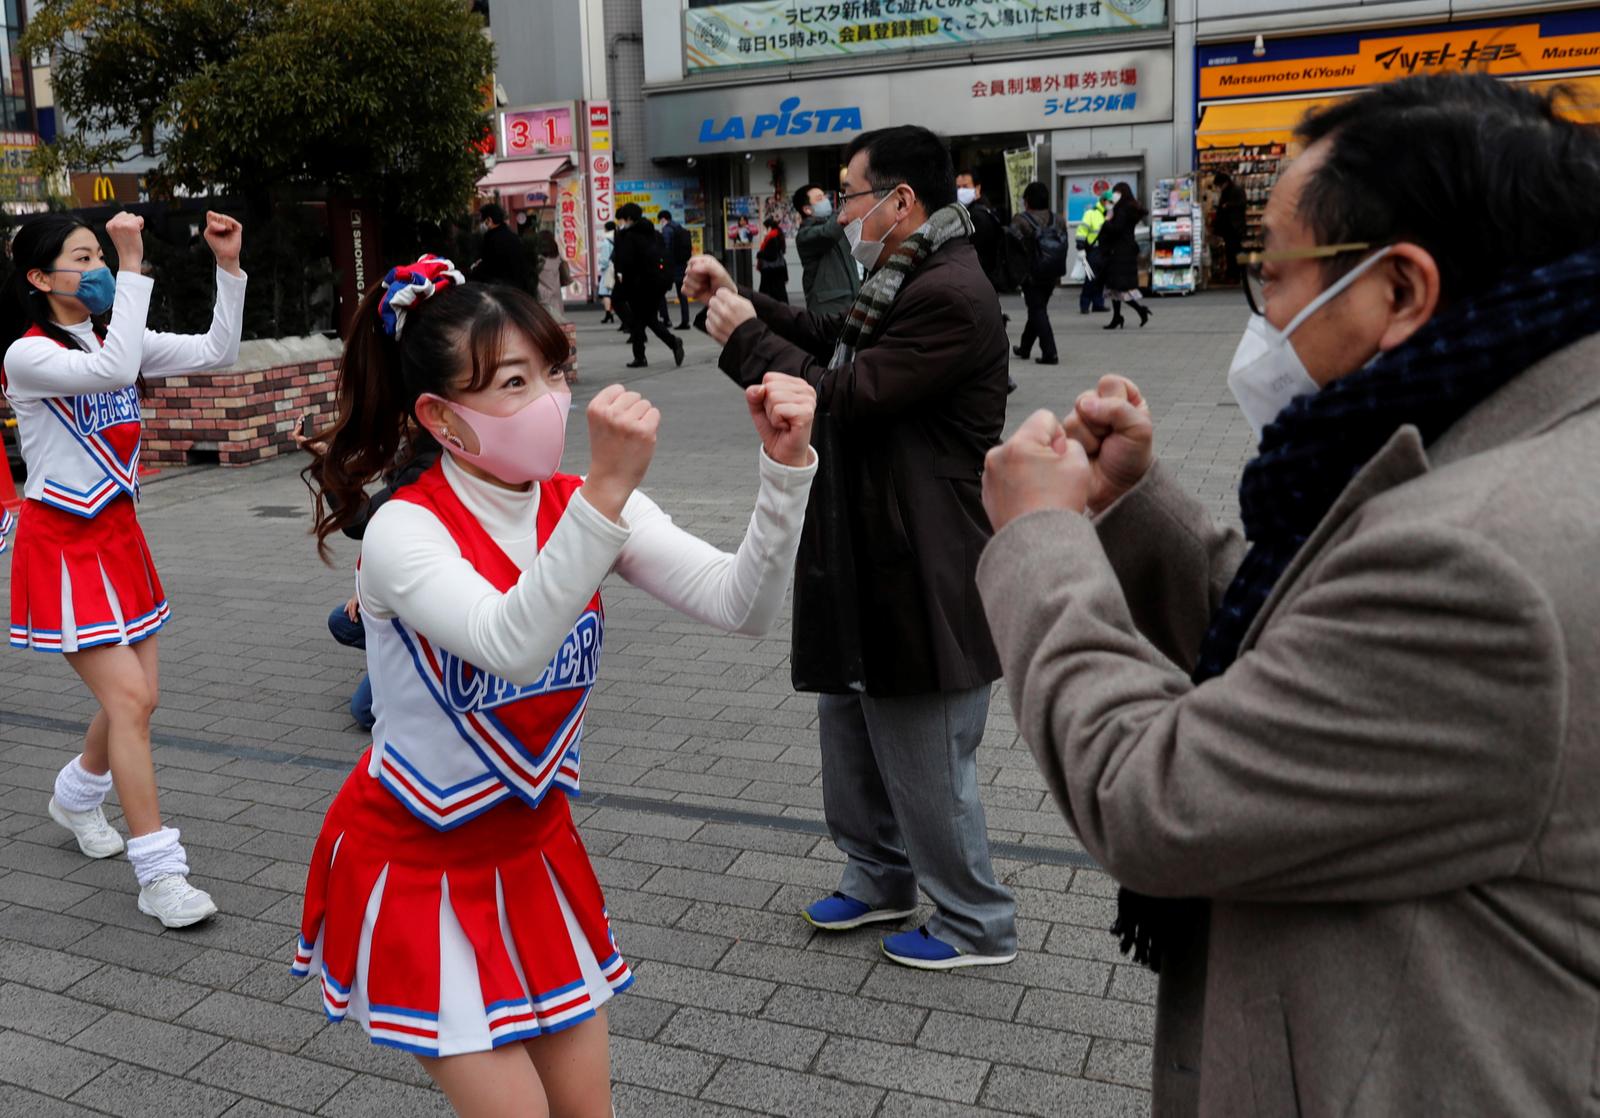 Cheerleaders wearing protective face shields, amid the coronavirus disease (COVID-19) outbreak, cheer people up in front of Shimbashi Station during the commuting hour in Tokyo, Japan, January 7, 2021. Photo: Reuters